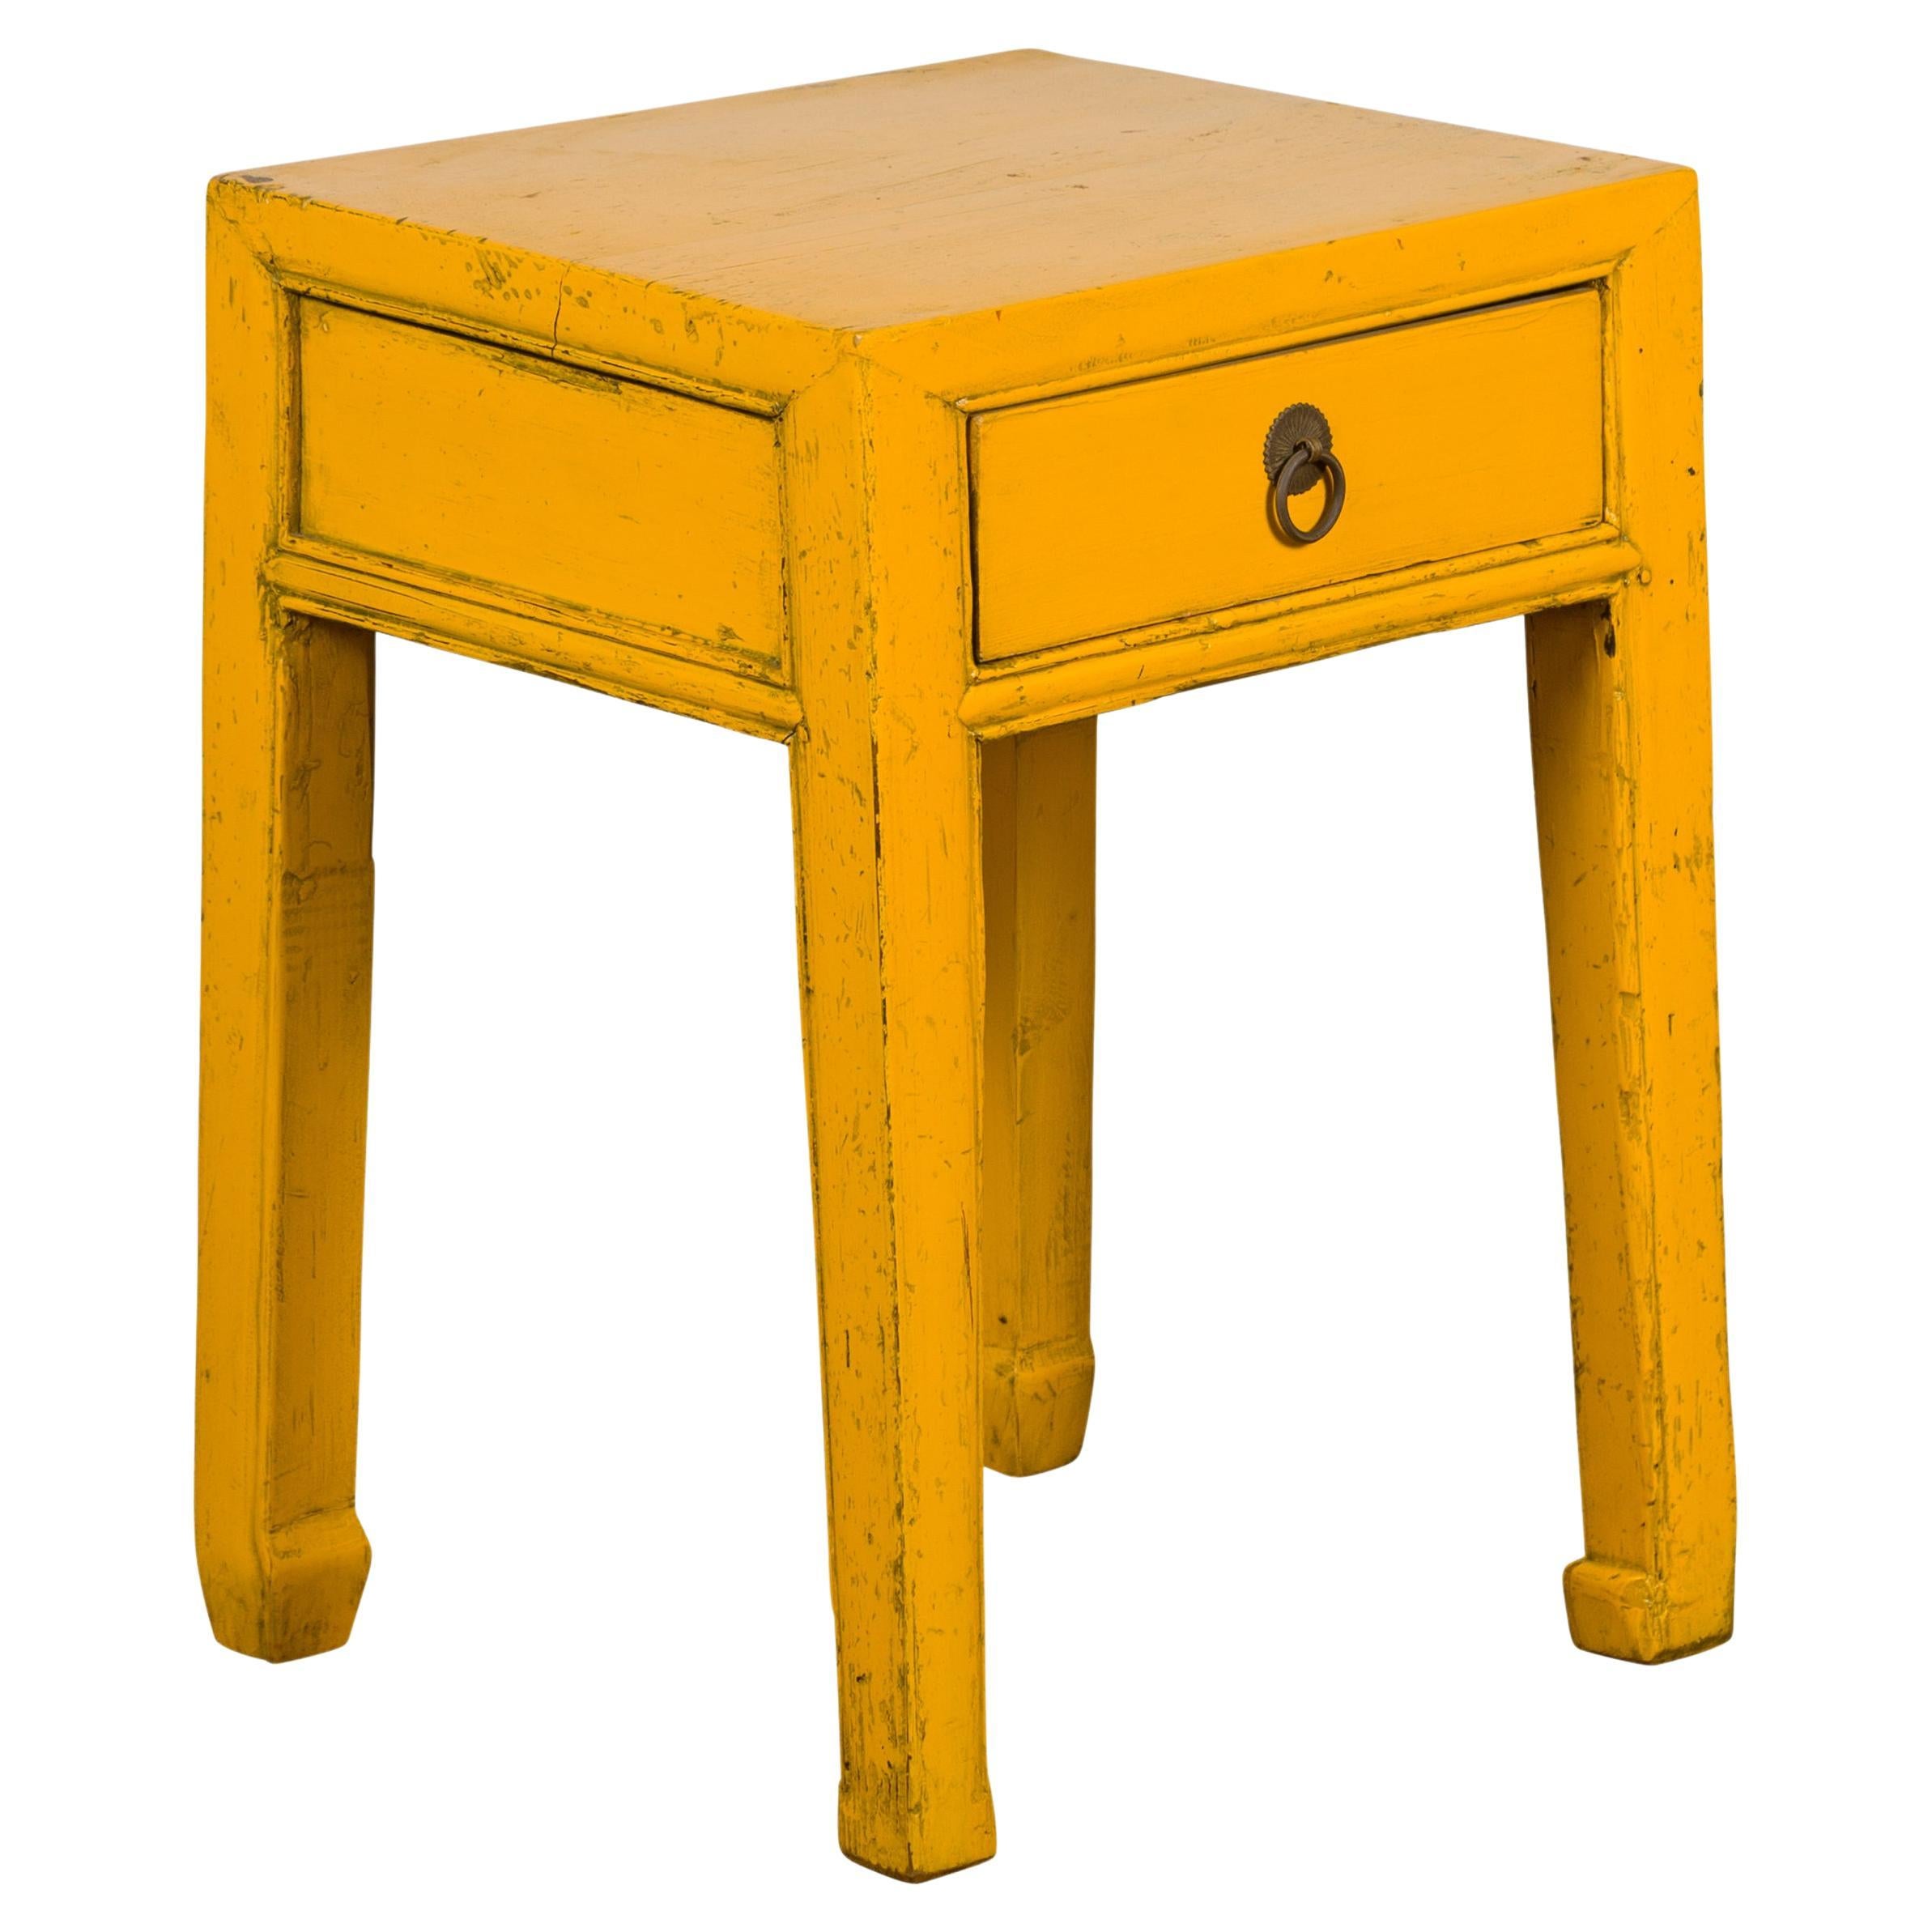 Chinese Vintage Distressed Yellow Lacquer with Single Drawer and Horse Hoof Feet